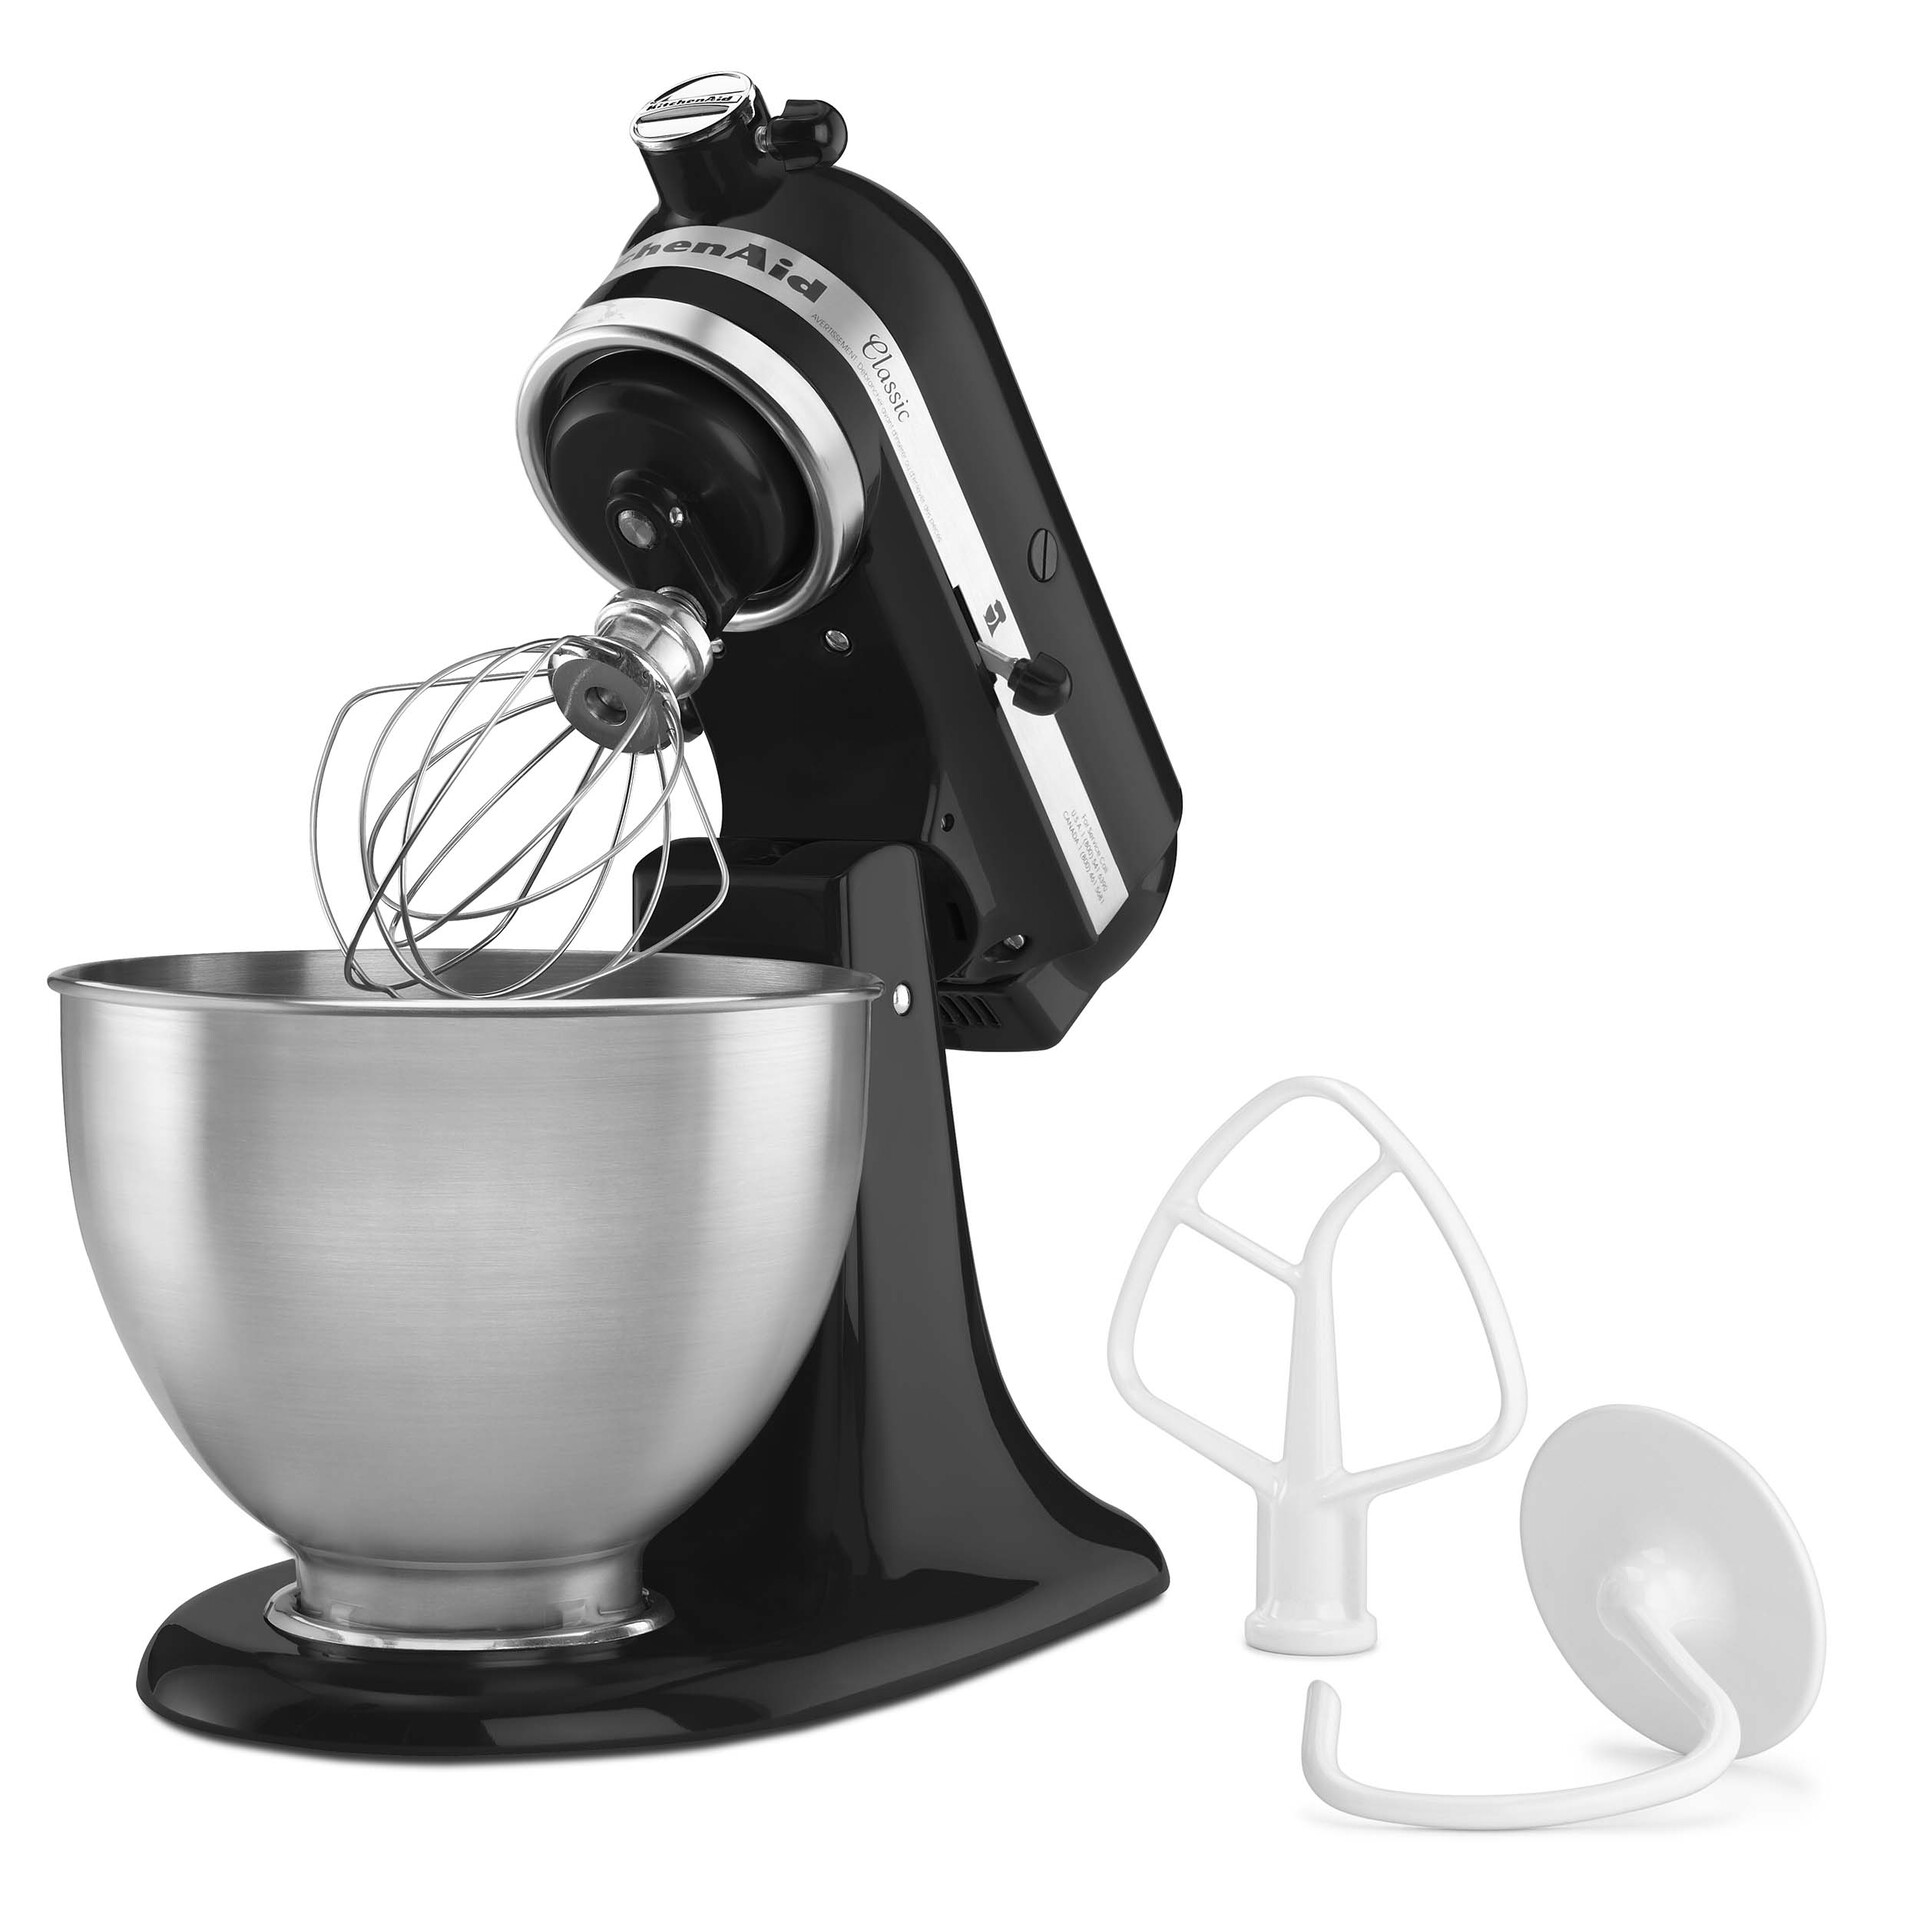  Stainless Steel Flat Beater for KitchenAid 4.5qt-5qt Tilt-Head  Stand Mixer, Fit for Classic, Classic Plus and Artisan Mixer K45SS, KSM75,  KSM90, KSM110, KSM125, KSM150 Heavy Duty and Dishwasher Safe: Home 